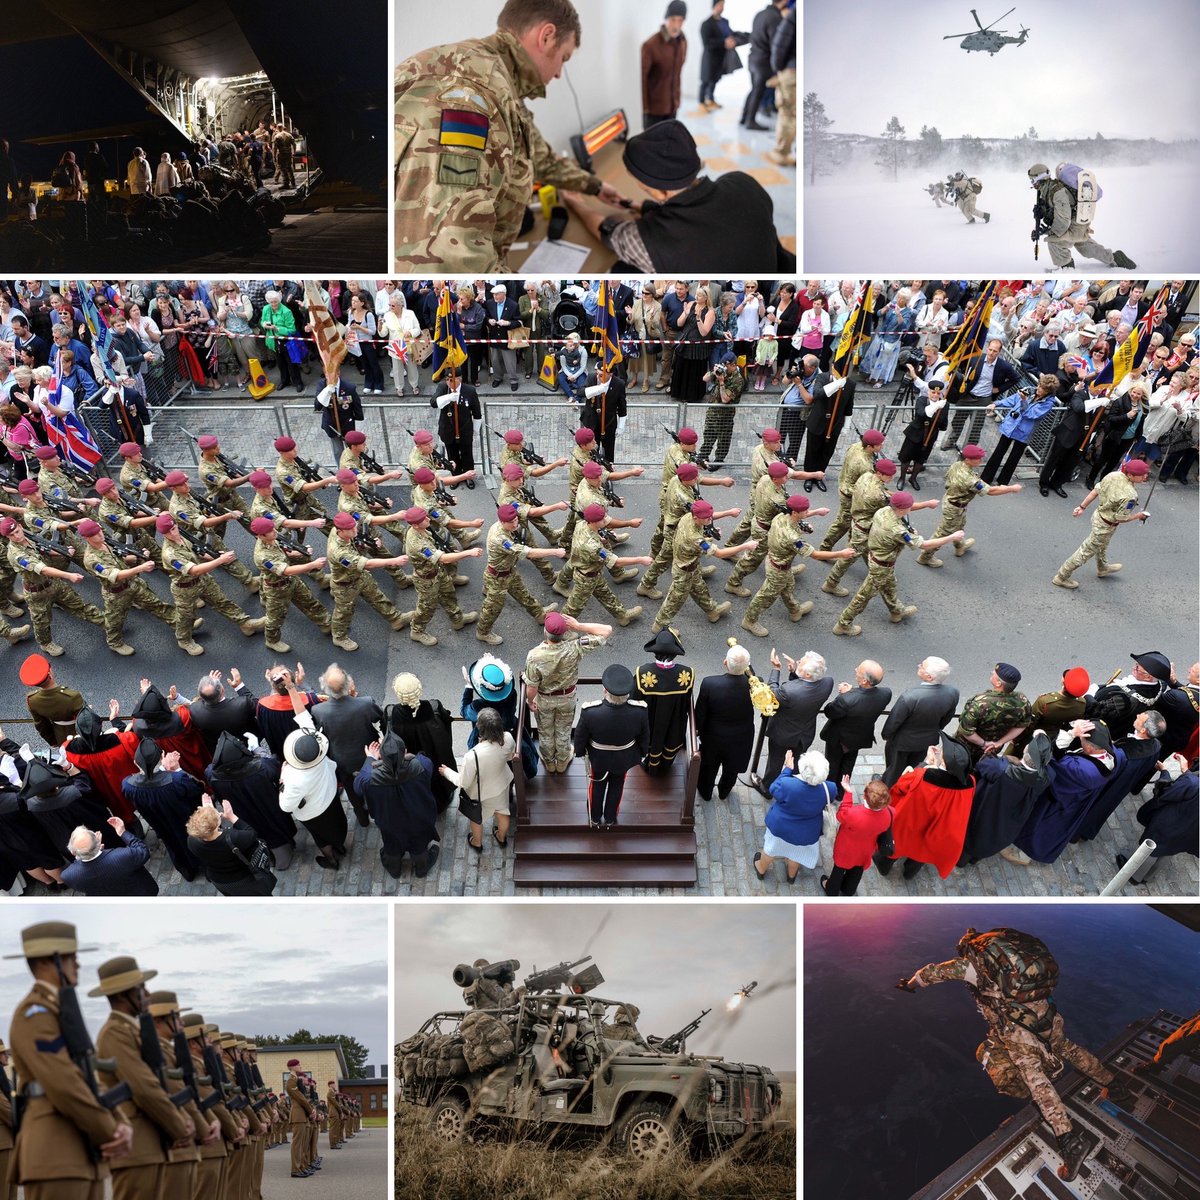 #OurCityOurSoldiers D-1: Evacuating civilians from Sudan🇸🇩, helping after the earthquake in Turkey🇹🇷, and training with our @NATO allies in Norway🇳🇴, Estonia🇪🇪, and Poland🇵🇱 - 2023 has already been busy! Come to tomorrow's Freedom of #Colchester parade to show your appreciation!